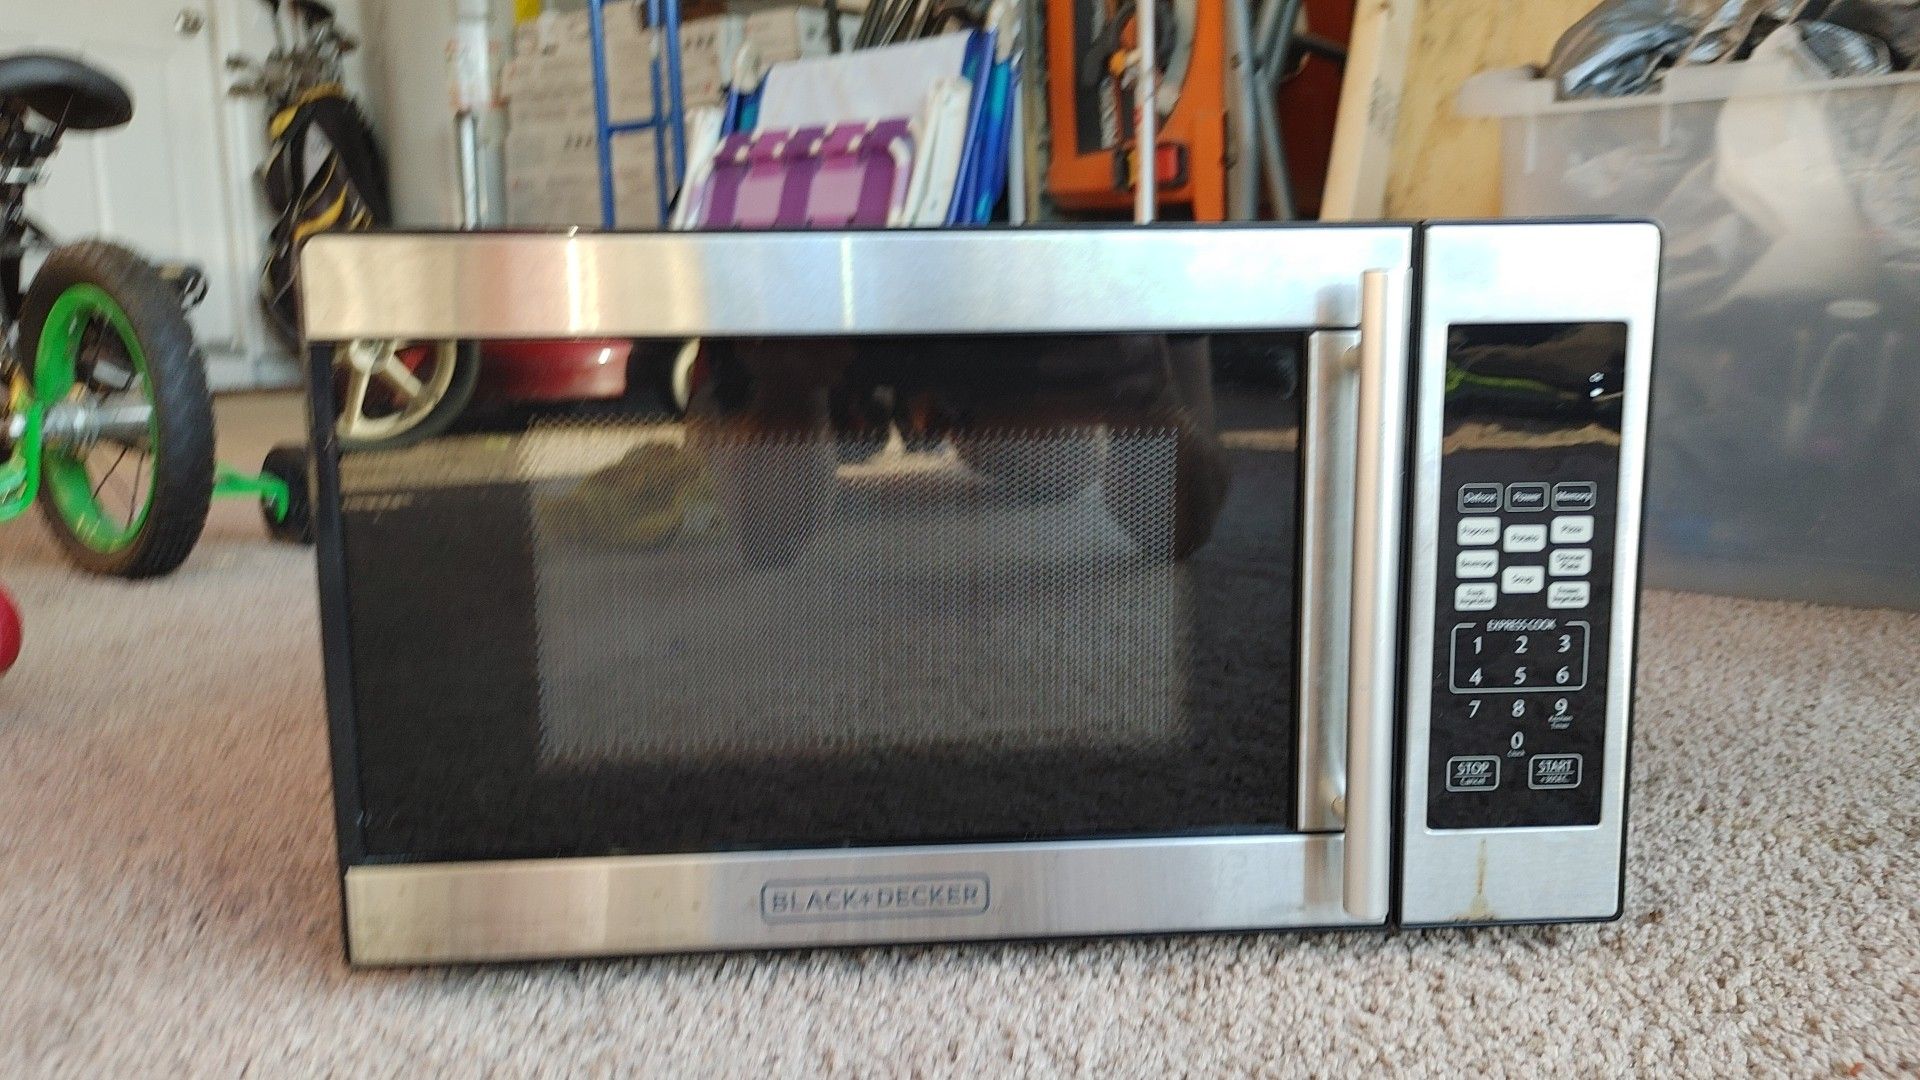 Black and decker microwave Free. In Good Condition